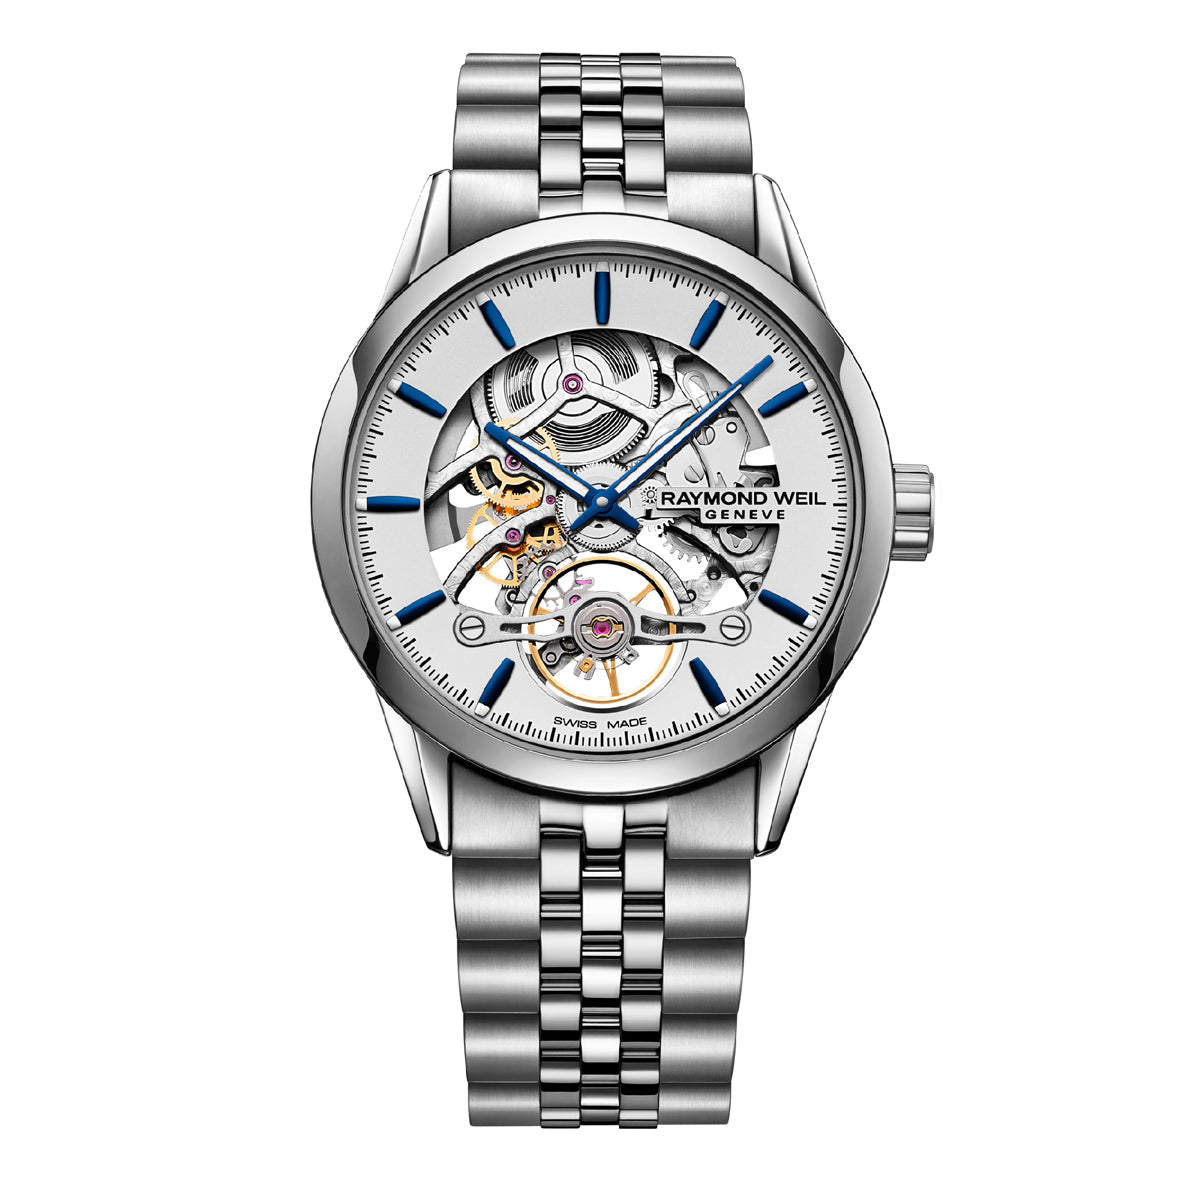 Raymond Weil 'Freelancer' 42mm Automatic Calibre Stainless Steel Watch